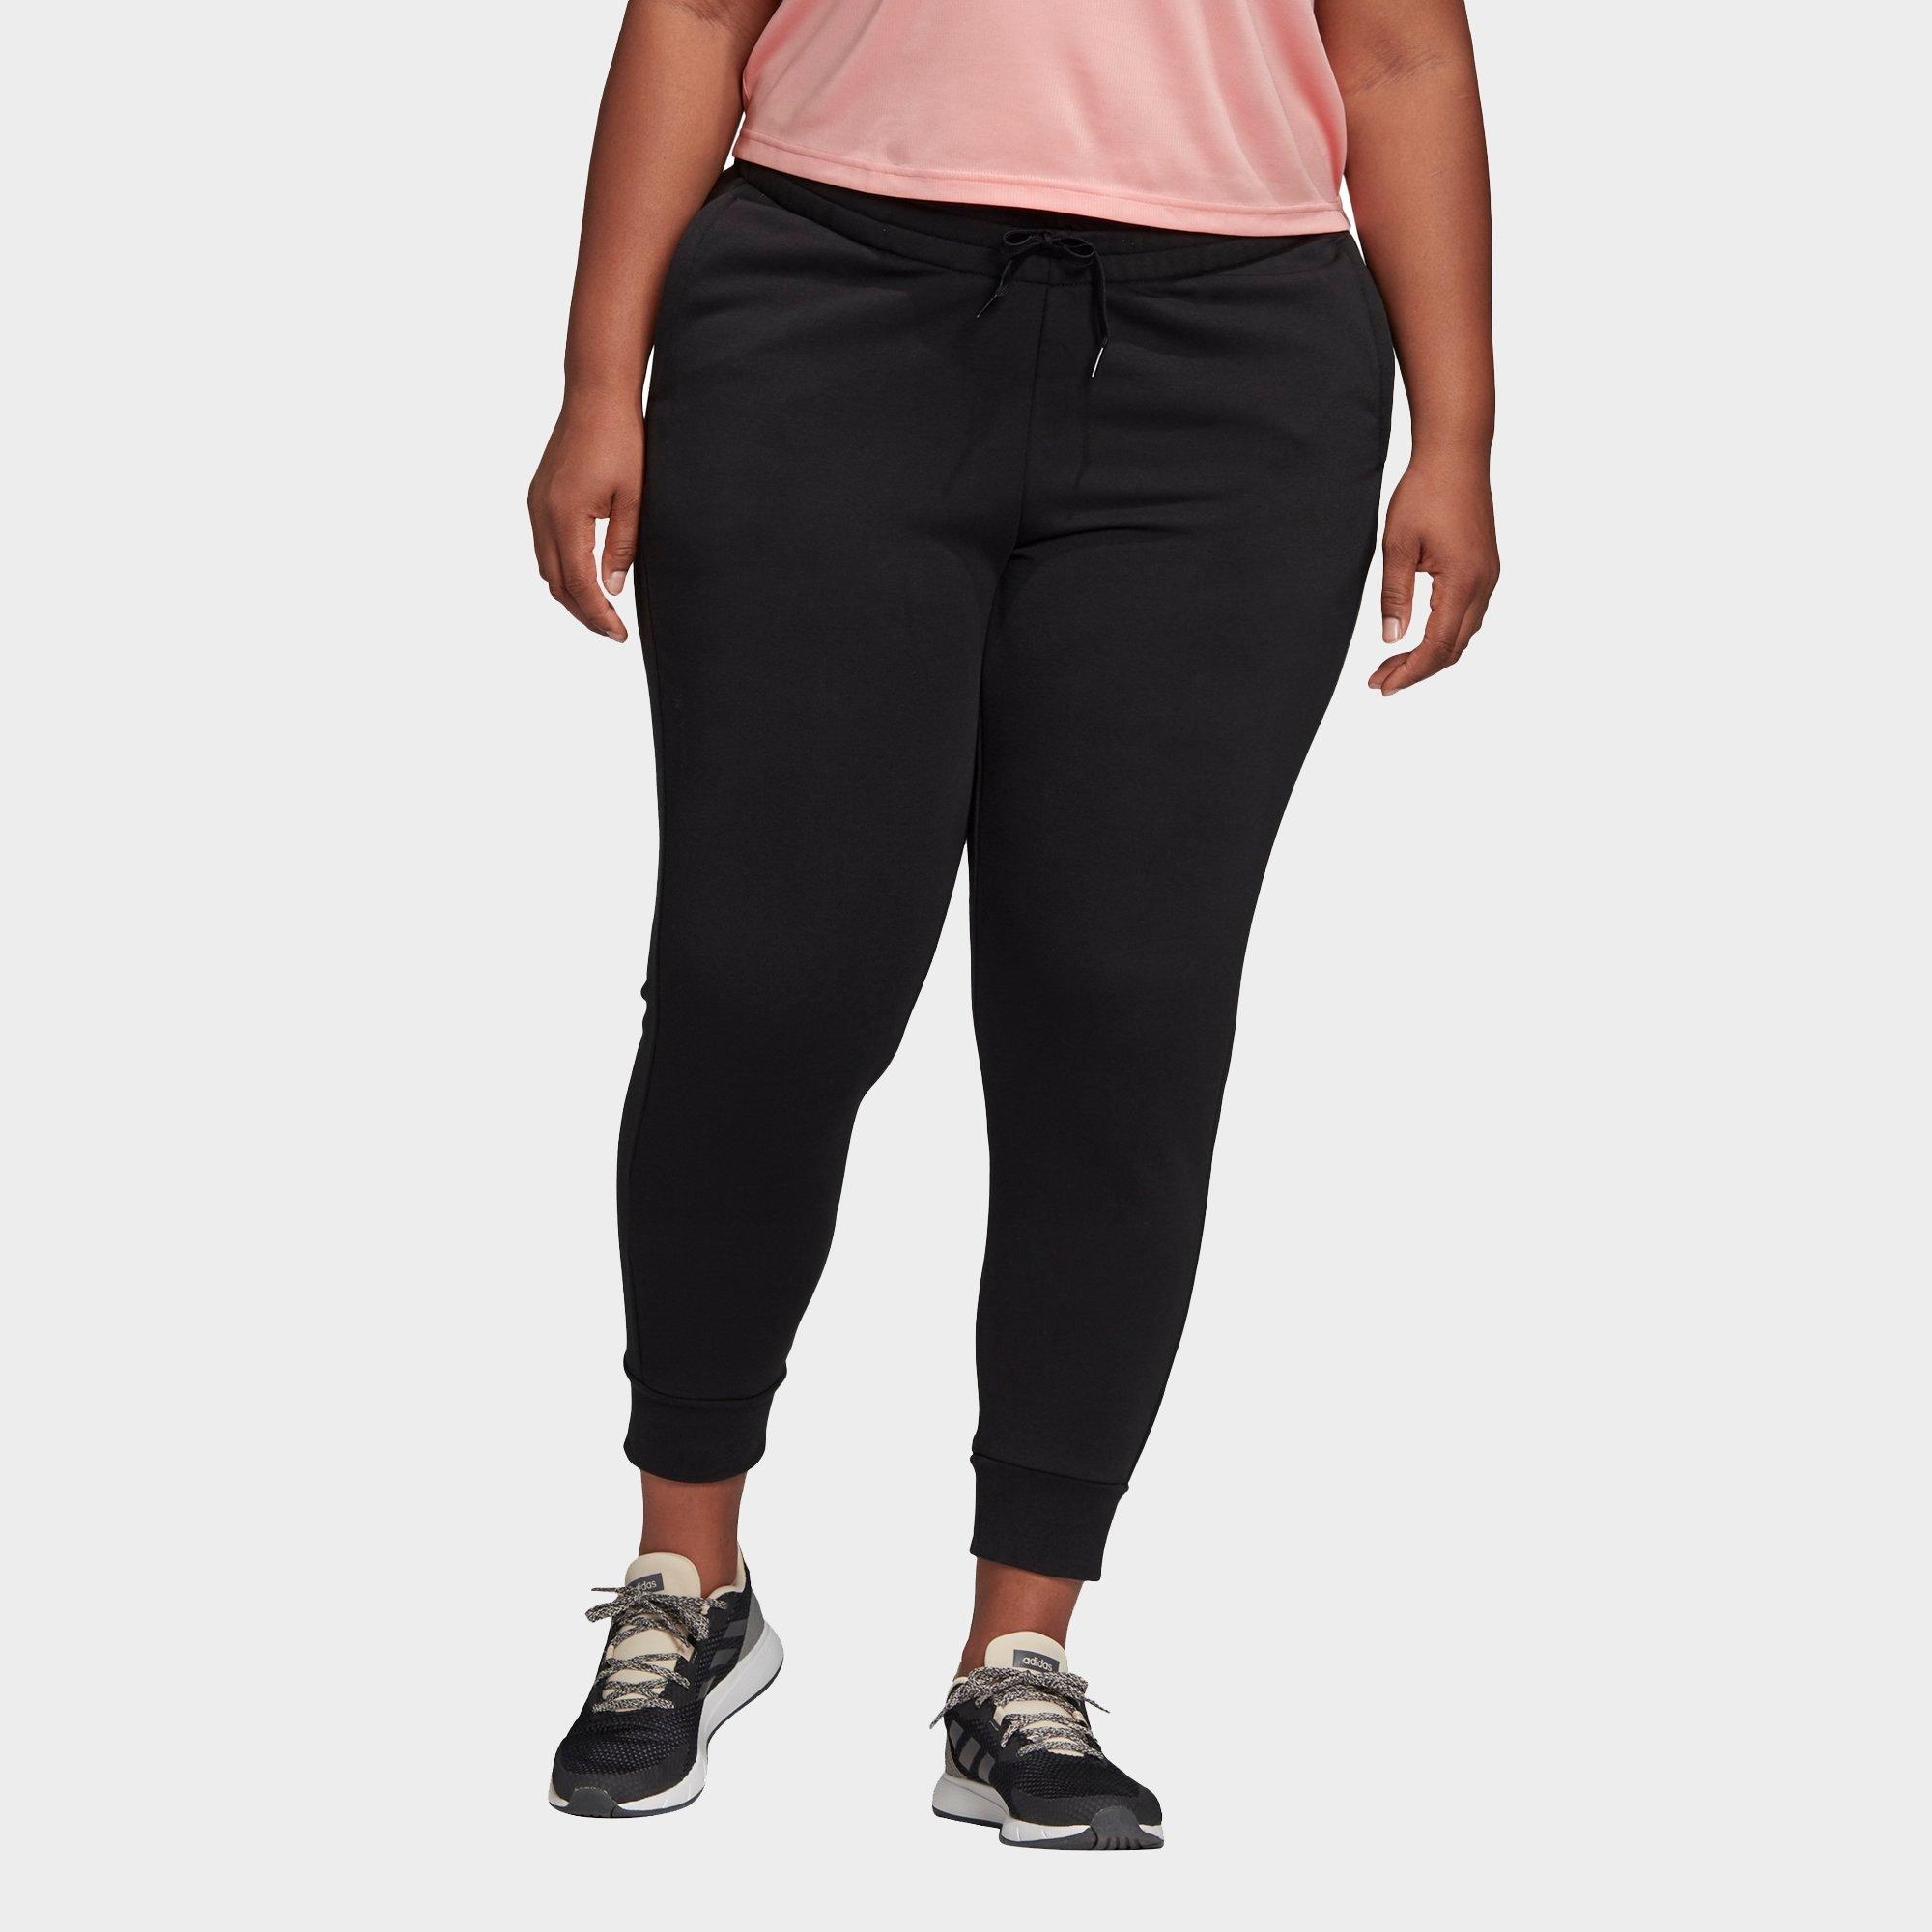 UPC 193105001642 product image for Adidas Women's Essentials Jogger Pants (Plus Size) in Black/Black Size Extra Lar | upcitemdb.com